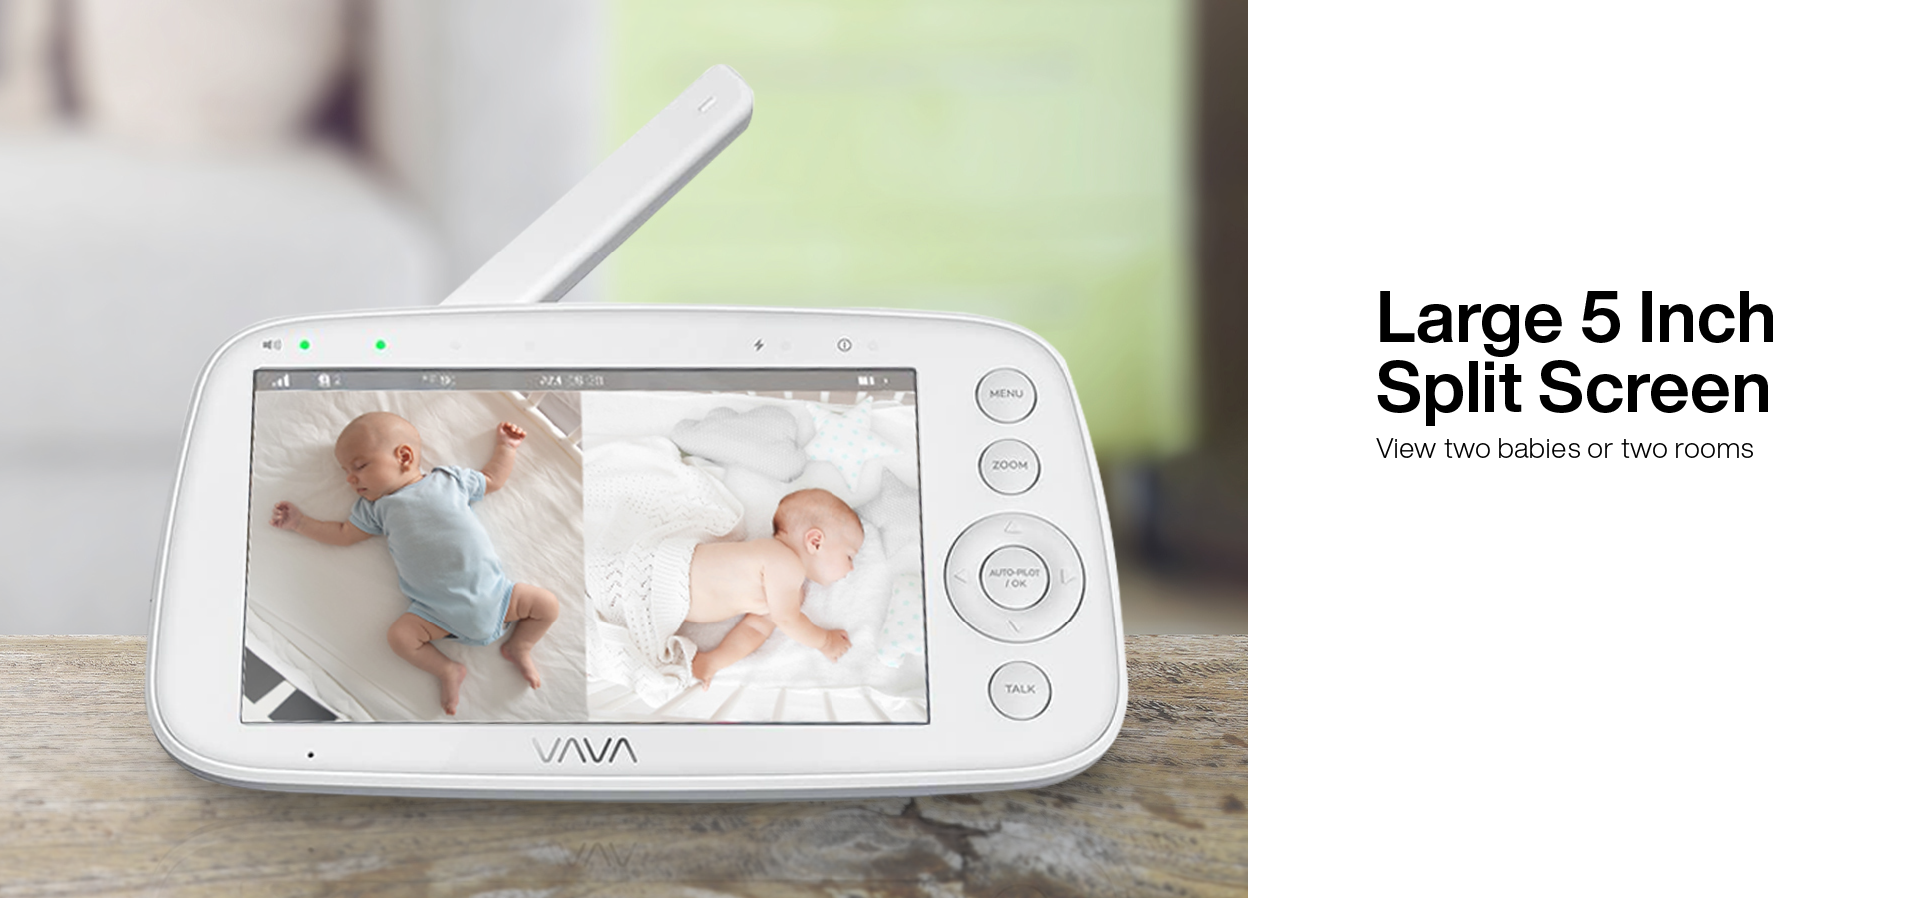 vava baby monitor with large 5 inch split screen